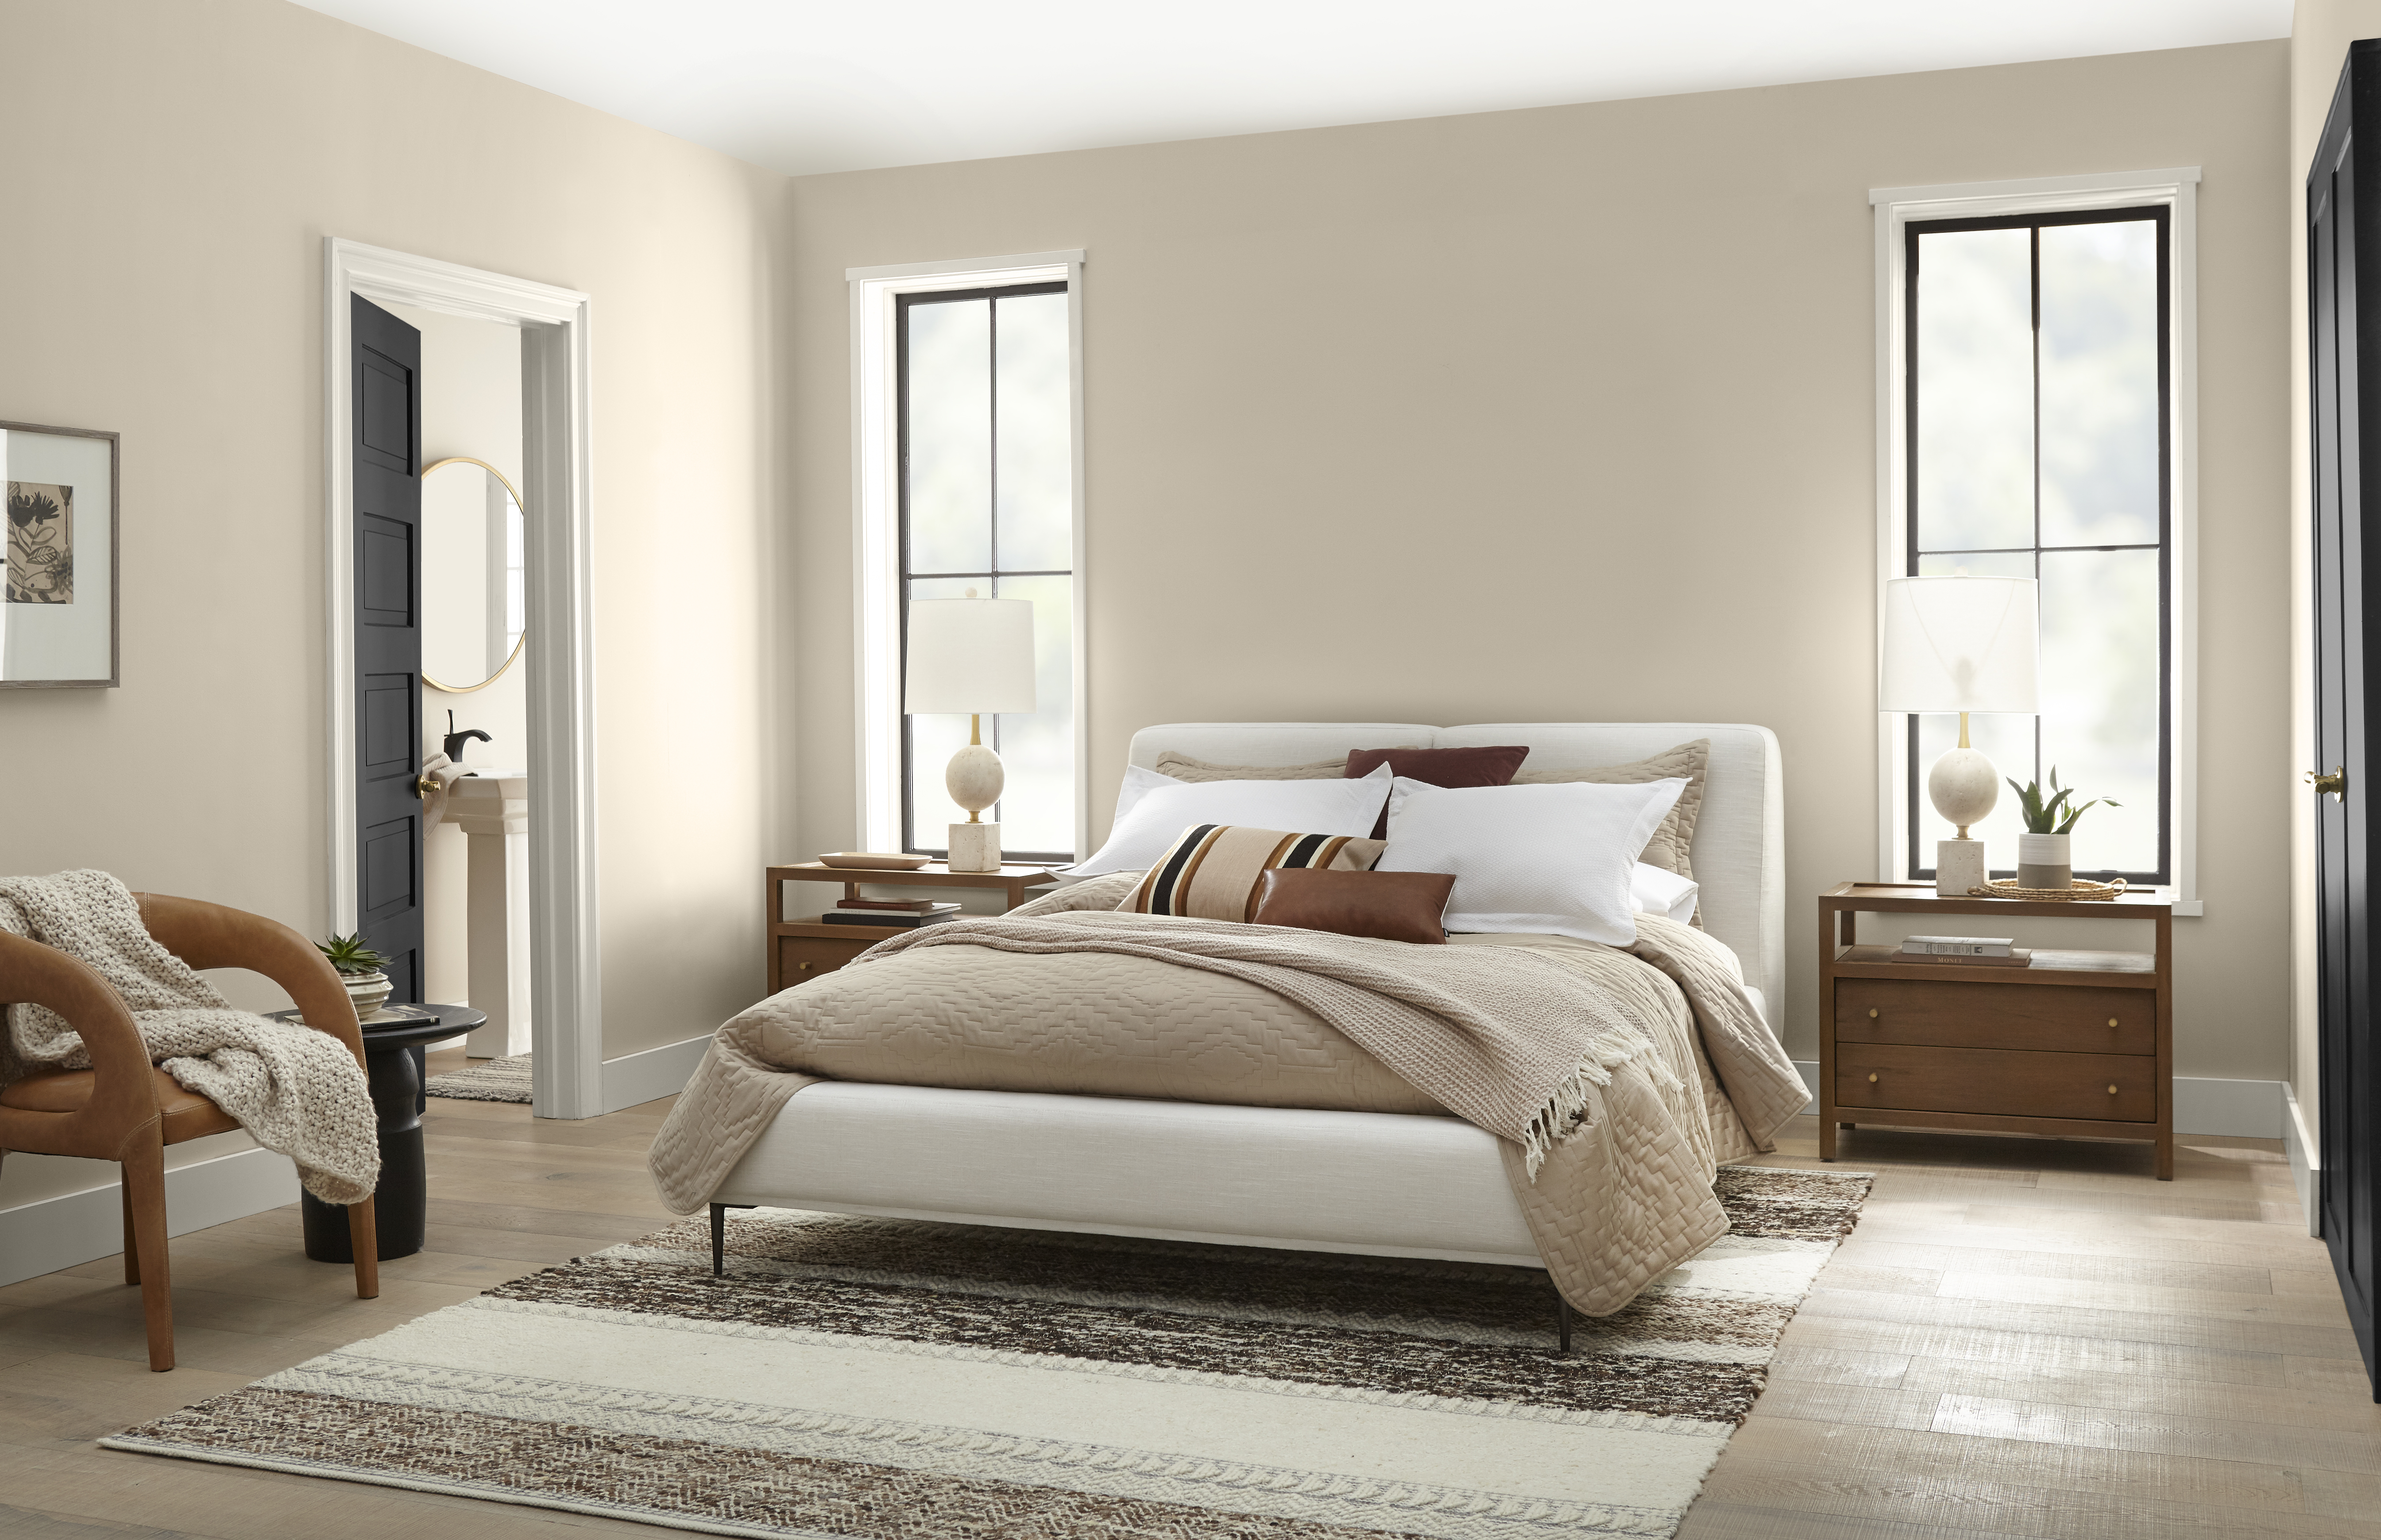 A bedroom painted in the colour Even Better Beige, with tall windows, modern neutral furniture, and black doors.